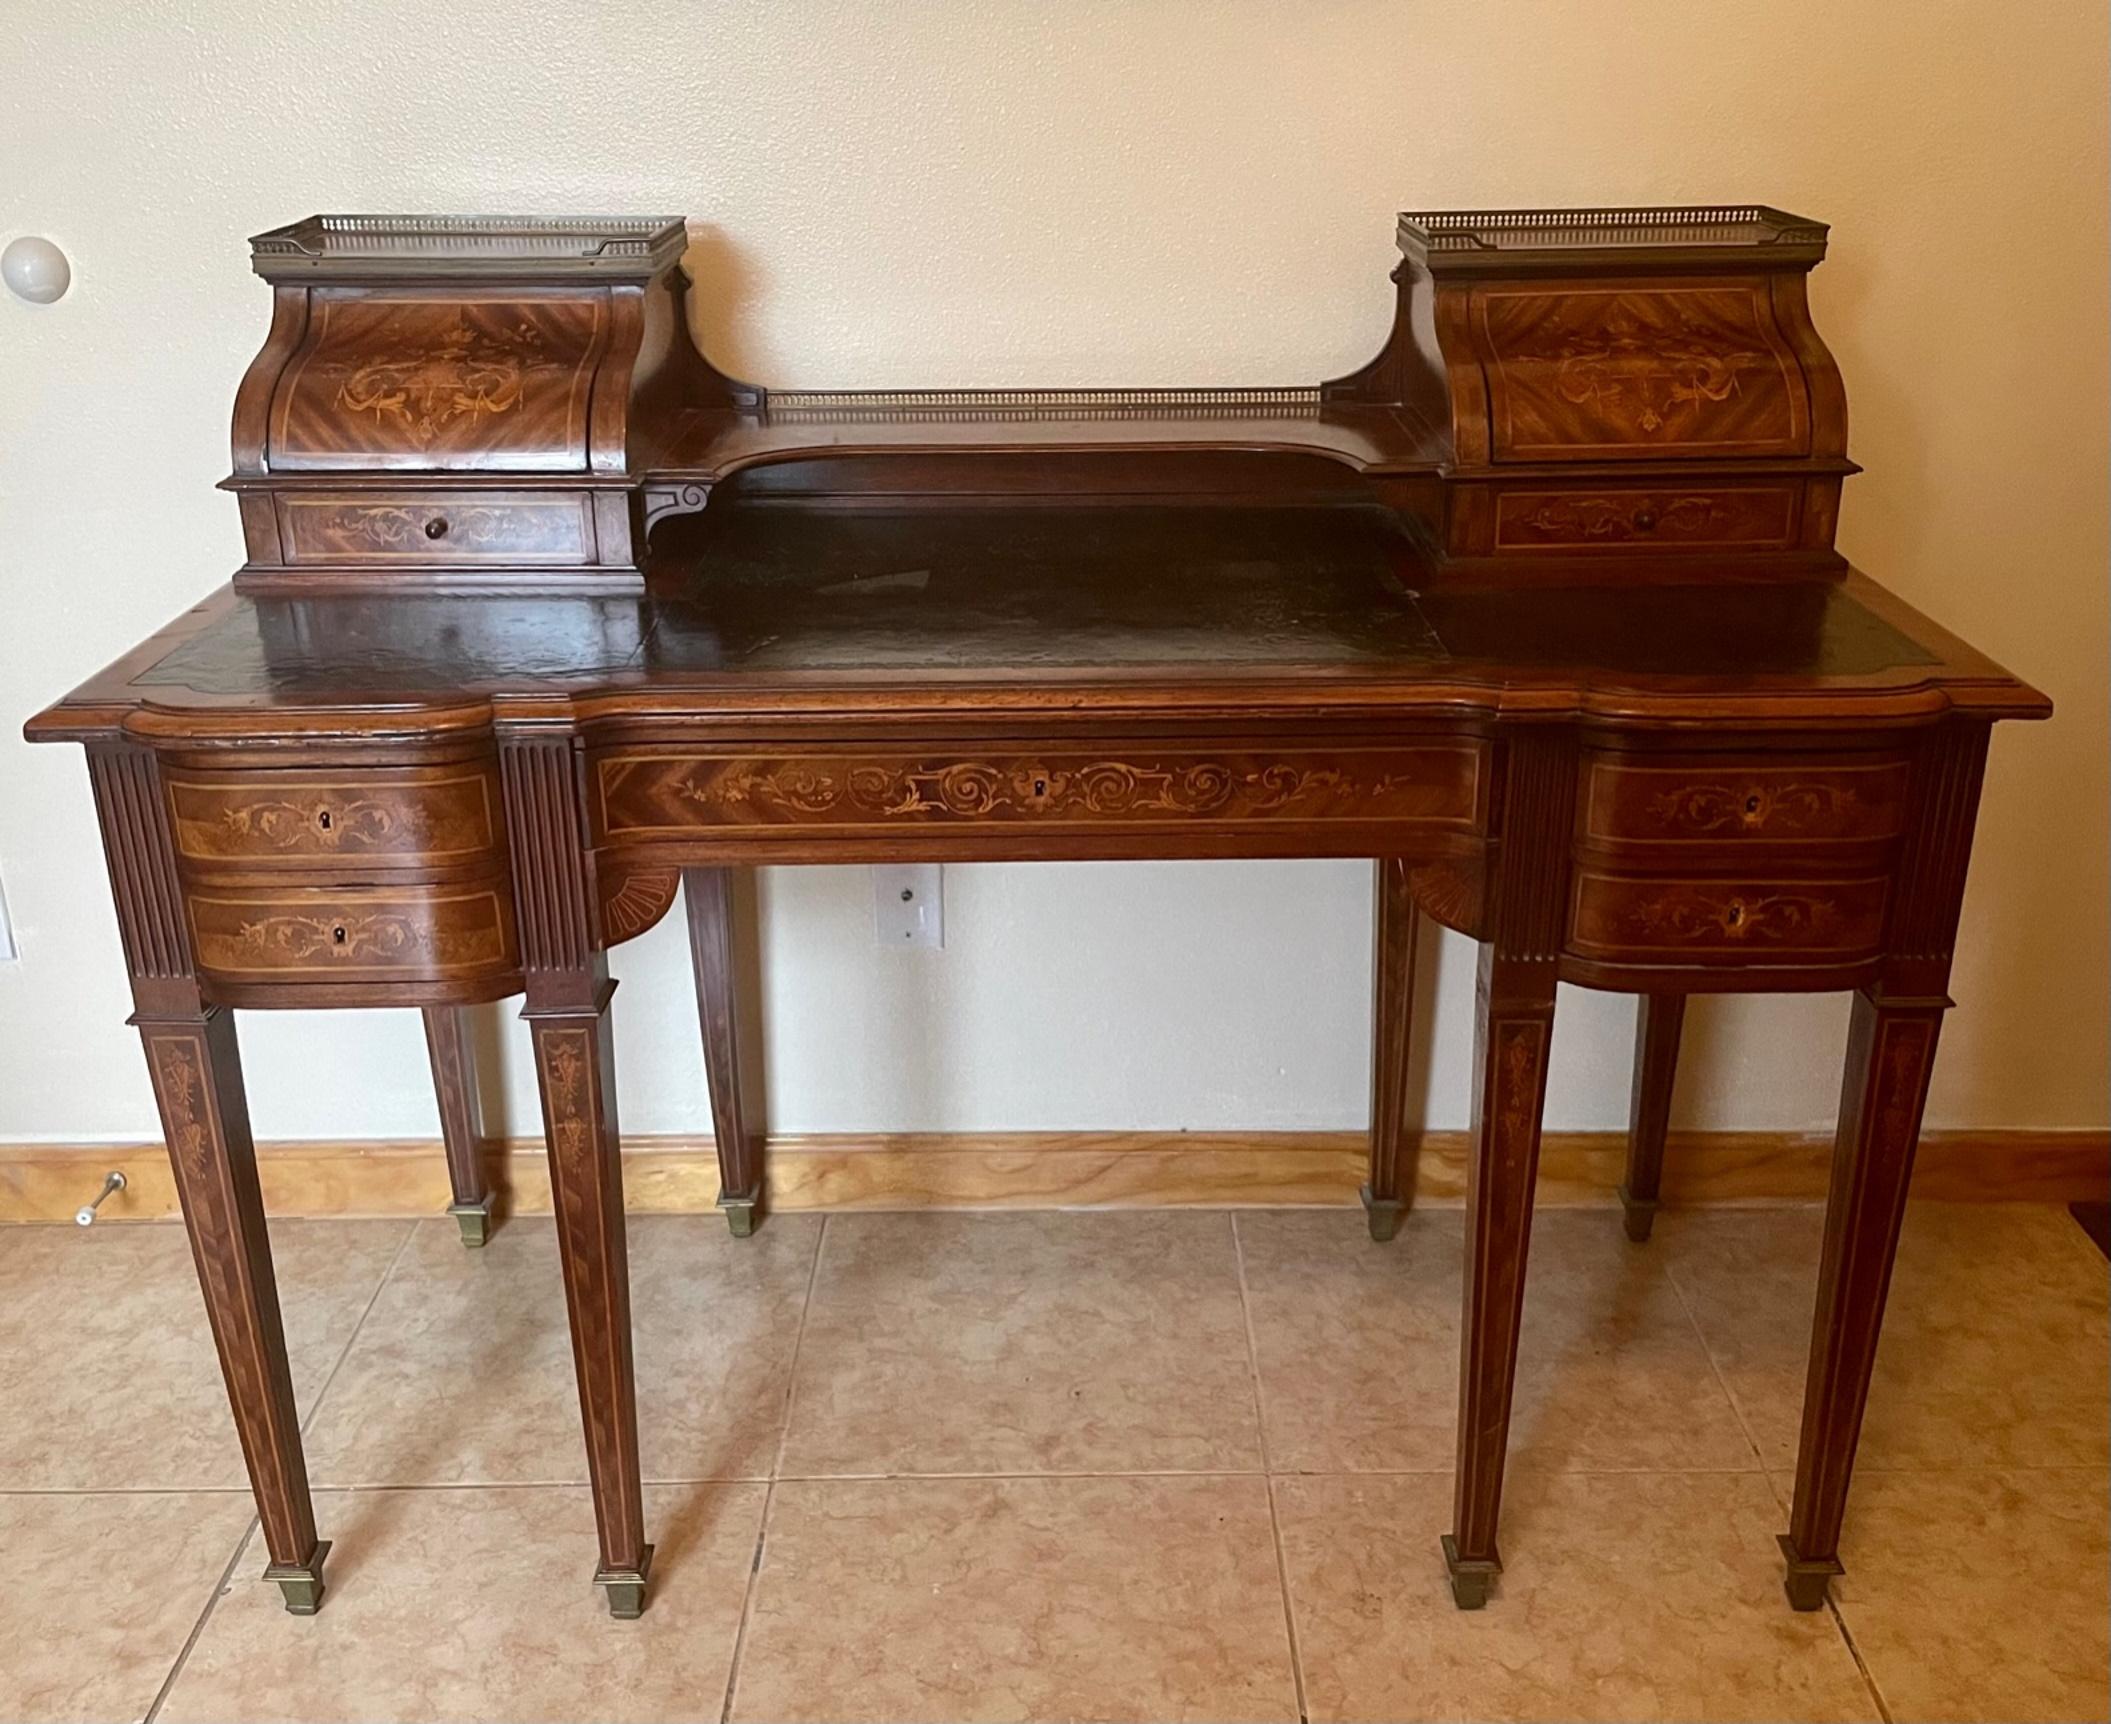 English Regency style mahogany and satinwood inlaid Carlton house desk.

Circa 1880 rare Carlton House desk, typical for the Regency period, is a beautiful piece of furniture. It is exquisitely made of exotic woods and inlaid with rich